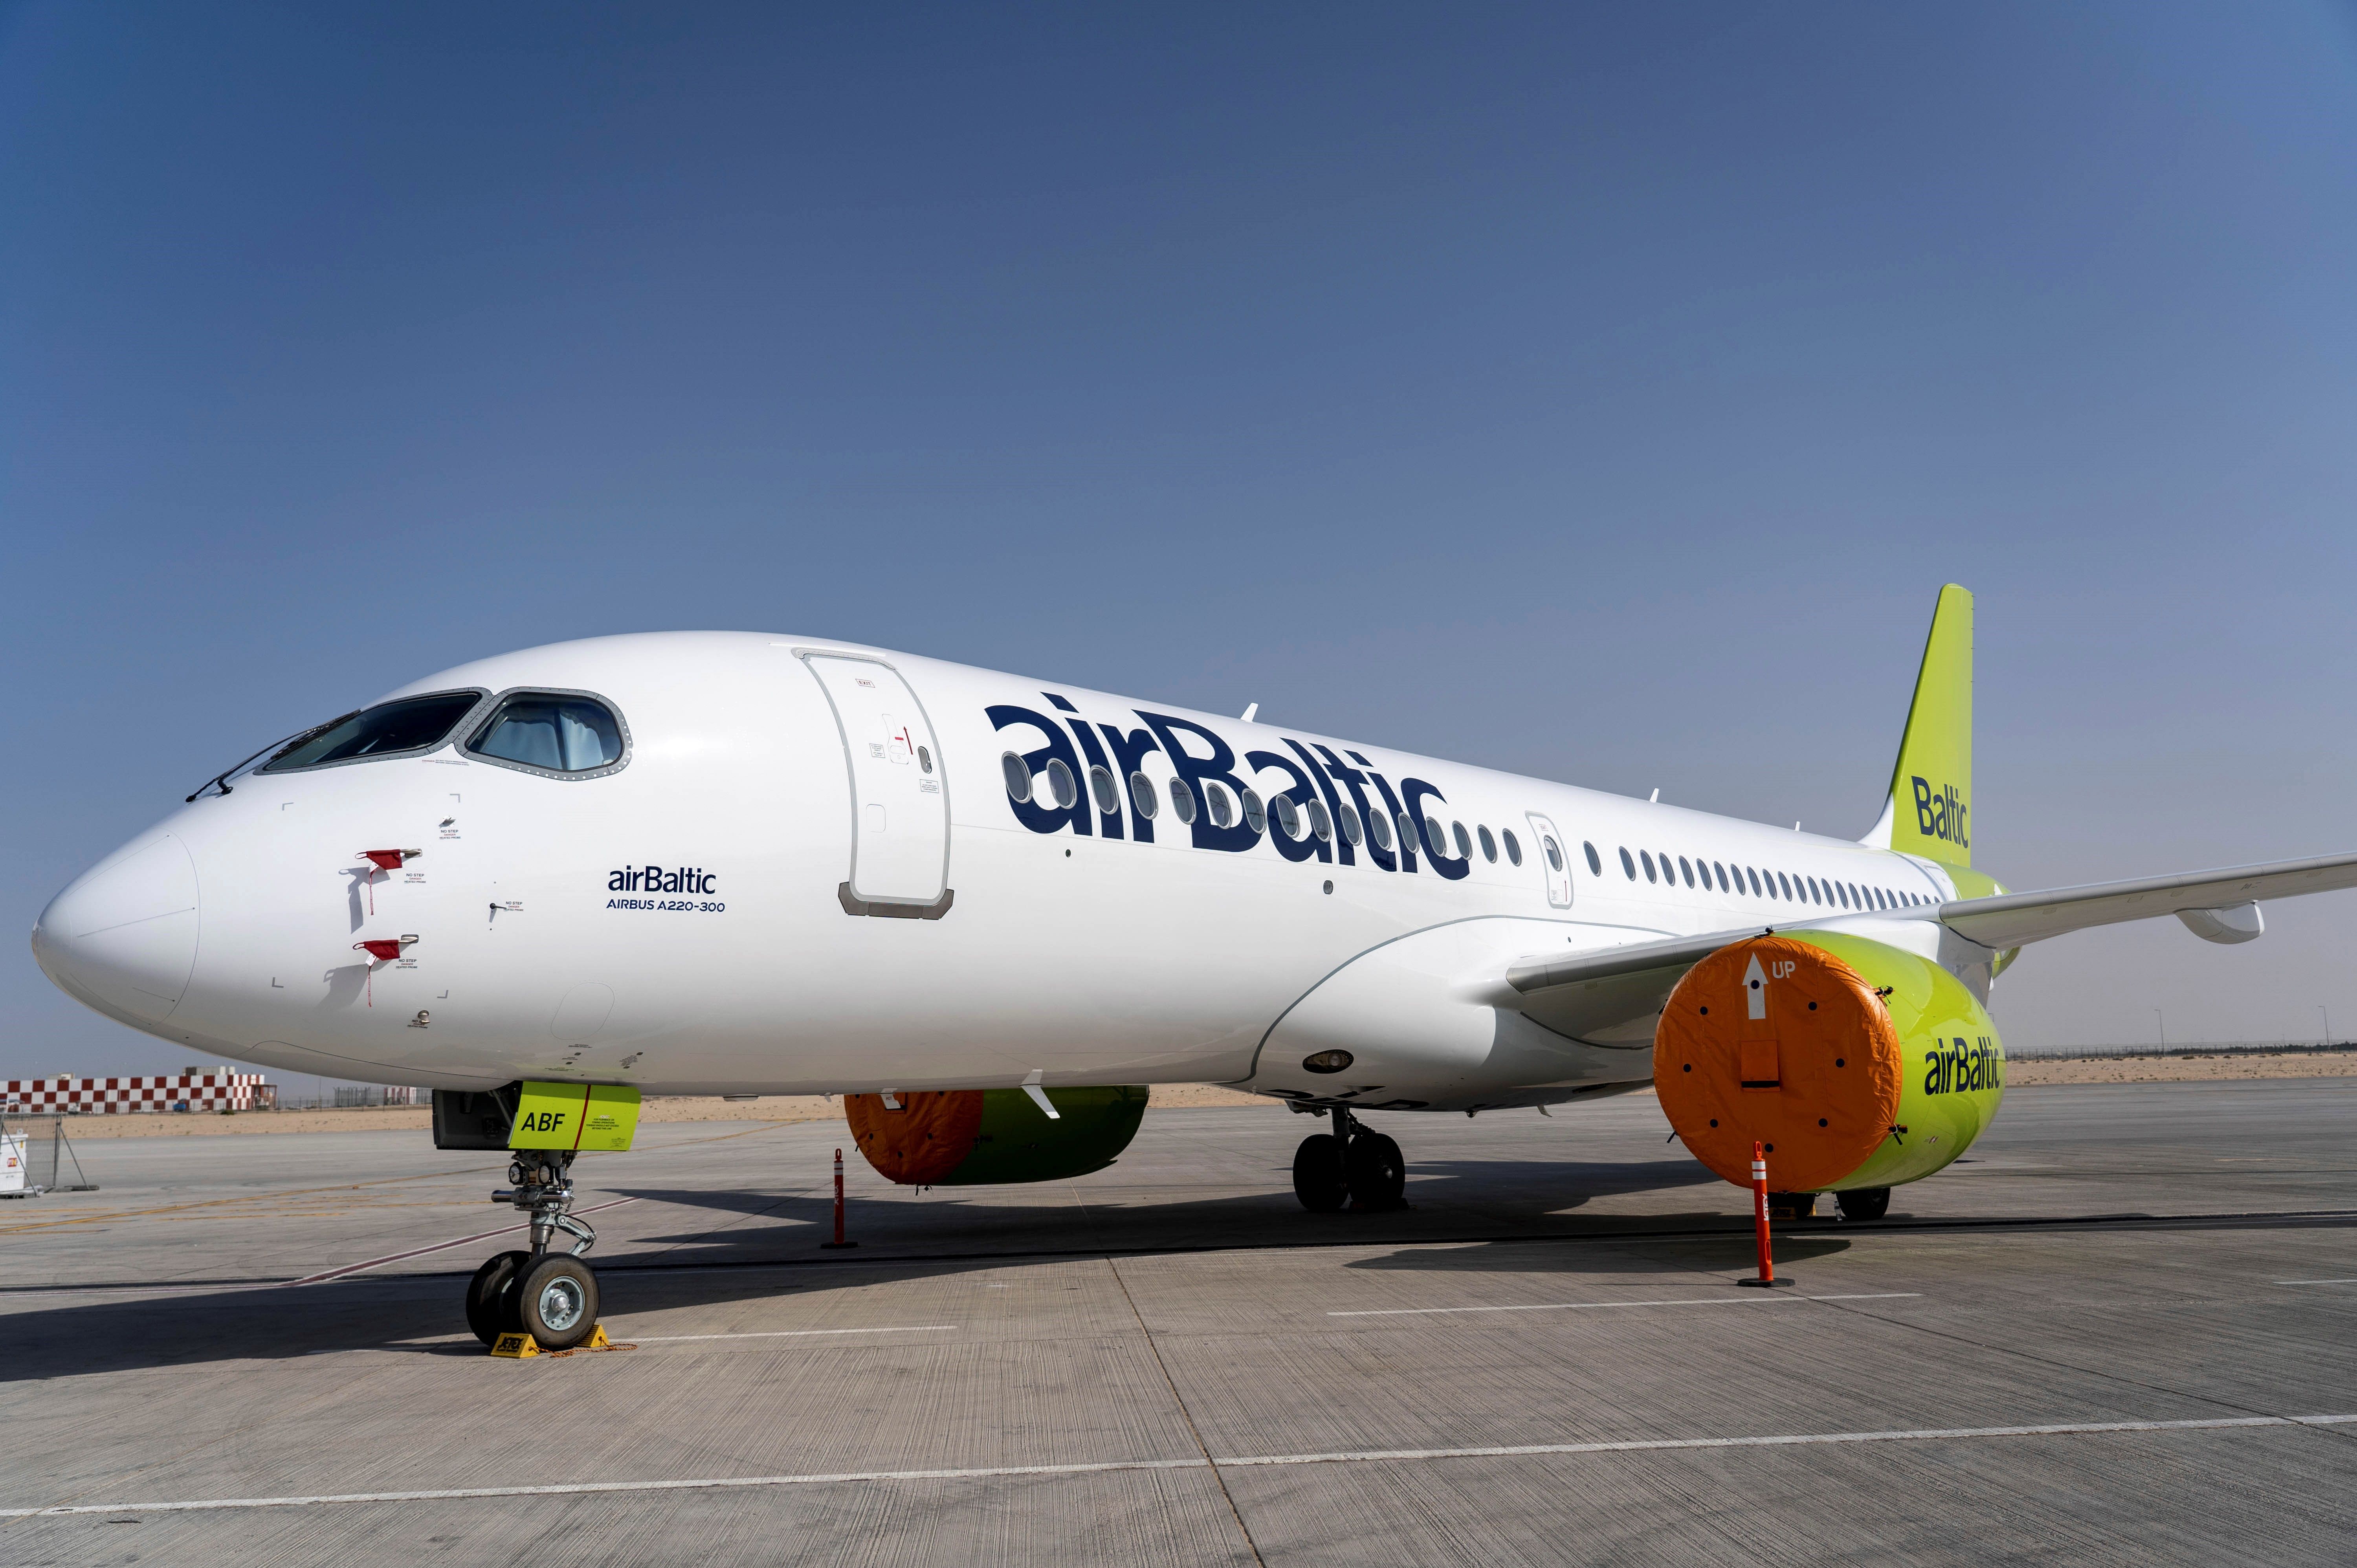 Dubai Airshow before opening - A220-300 airBaltic on ground